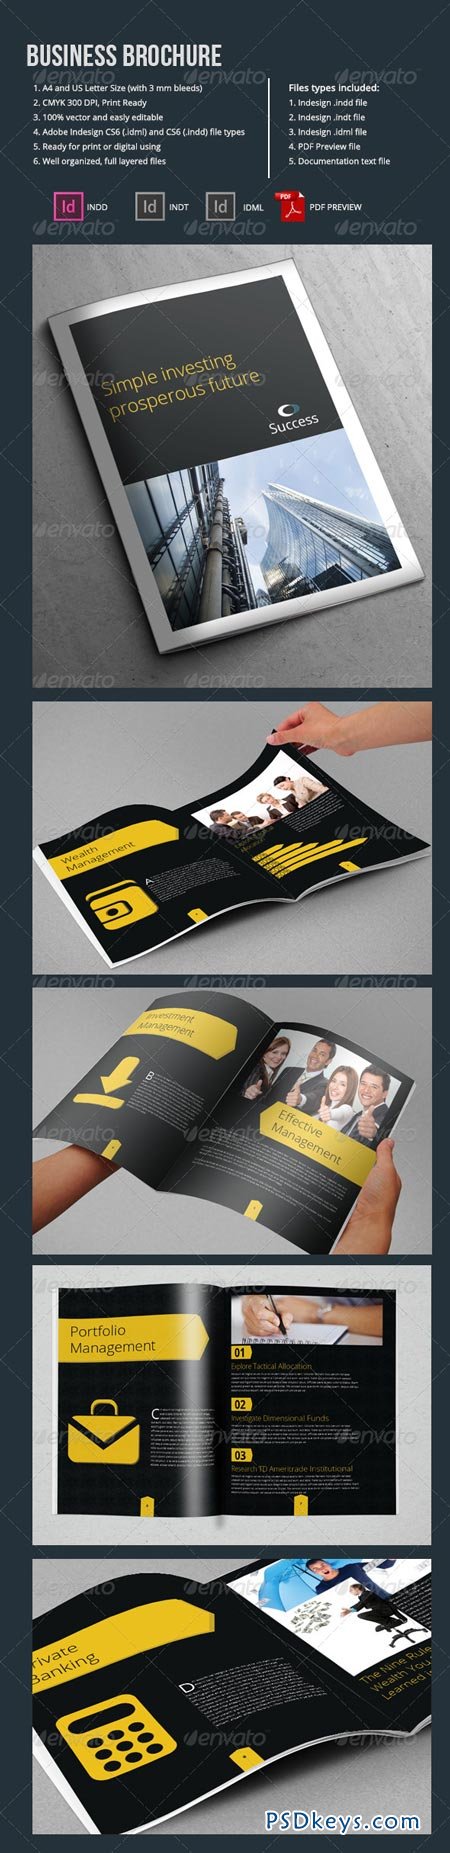 A4 Business Brochure Template 10 Pages 6791489